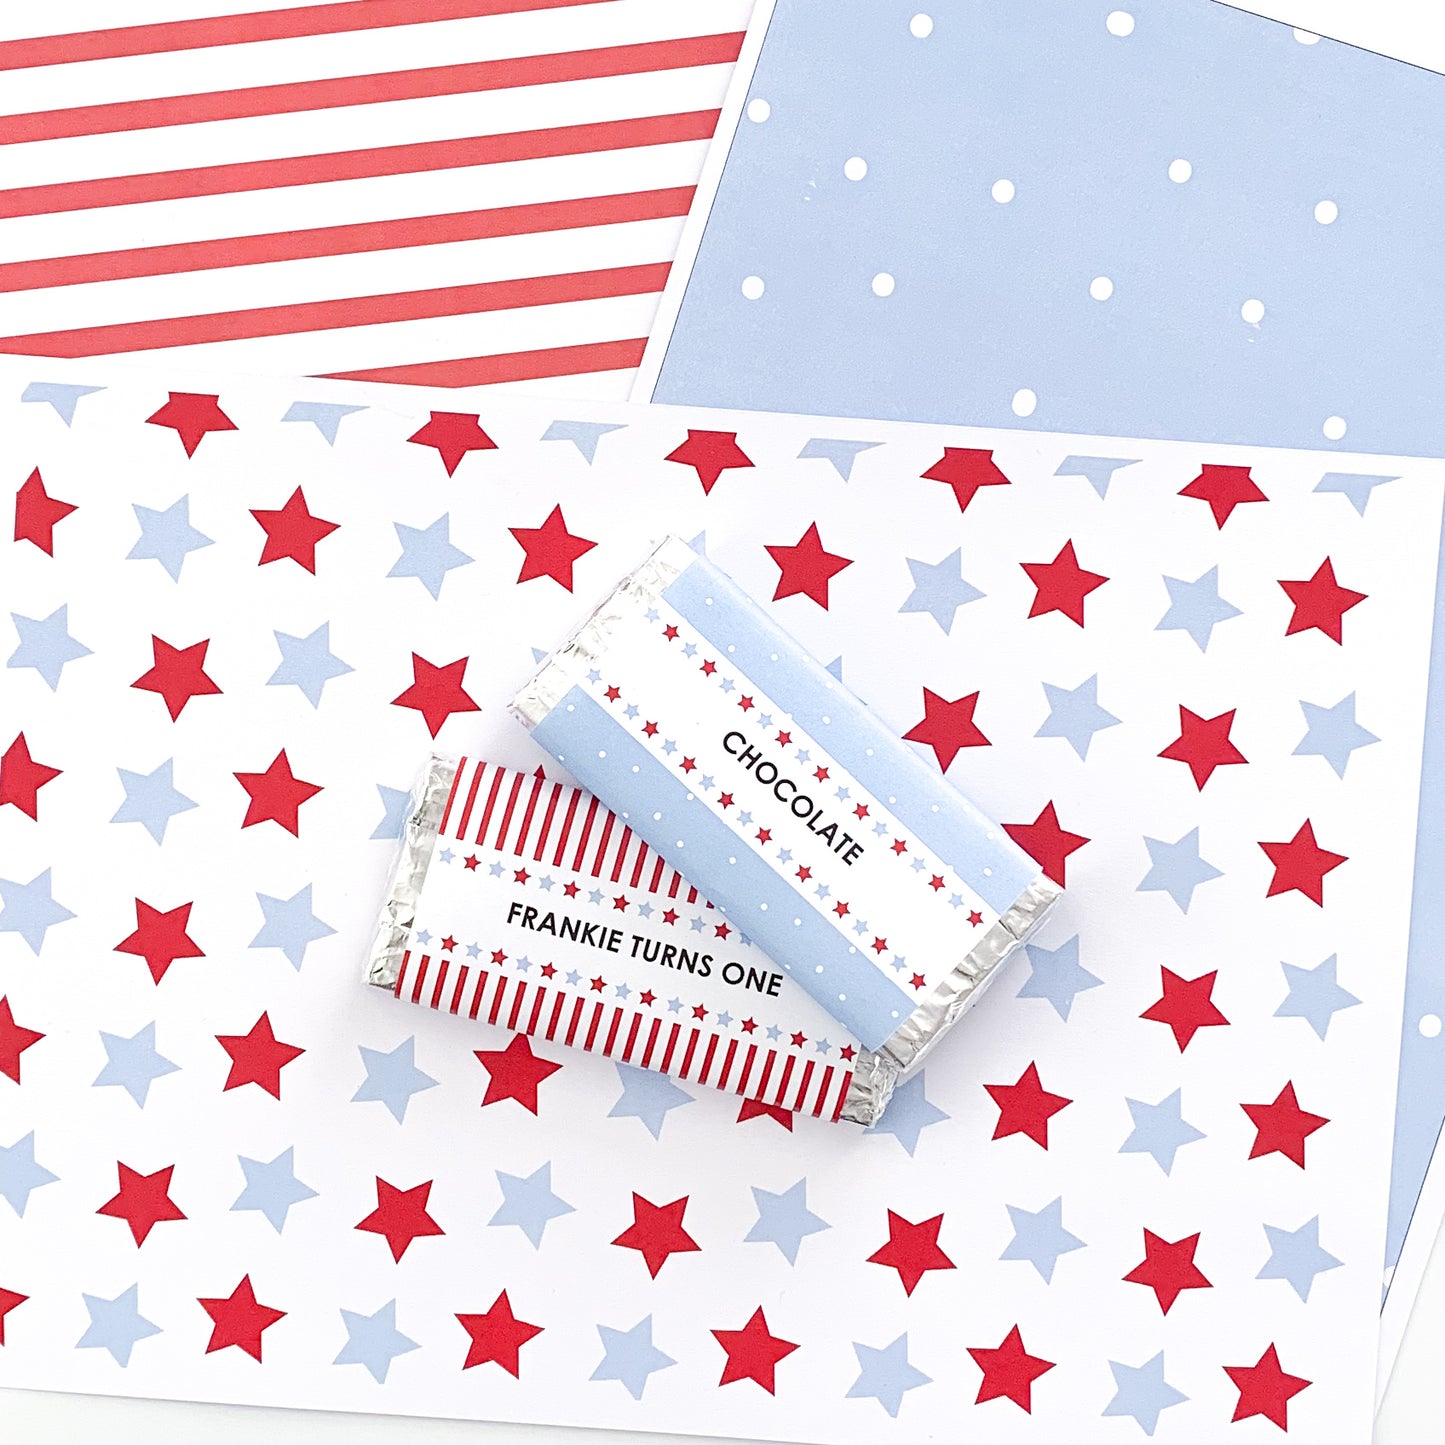 Circus theme patterned paper download by The Printable Place